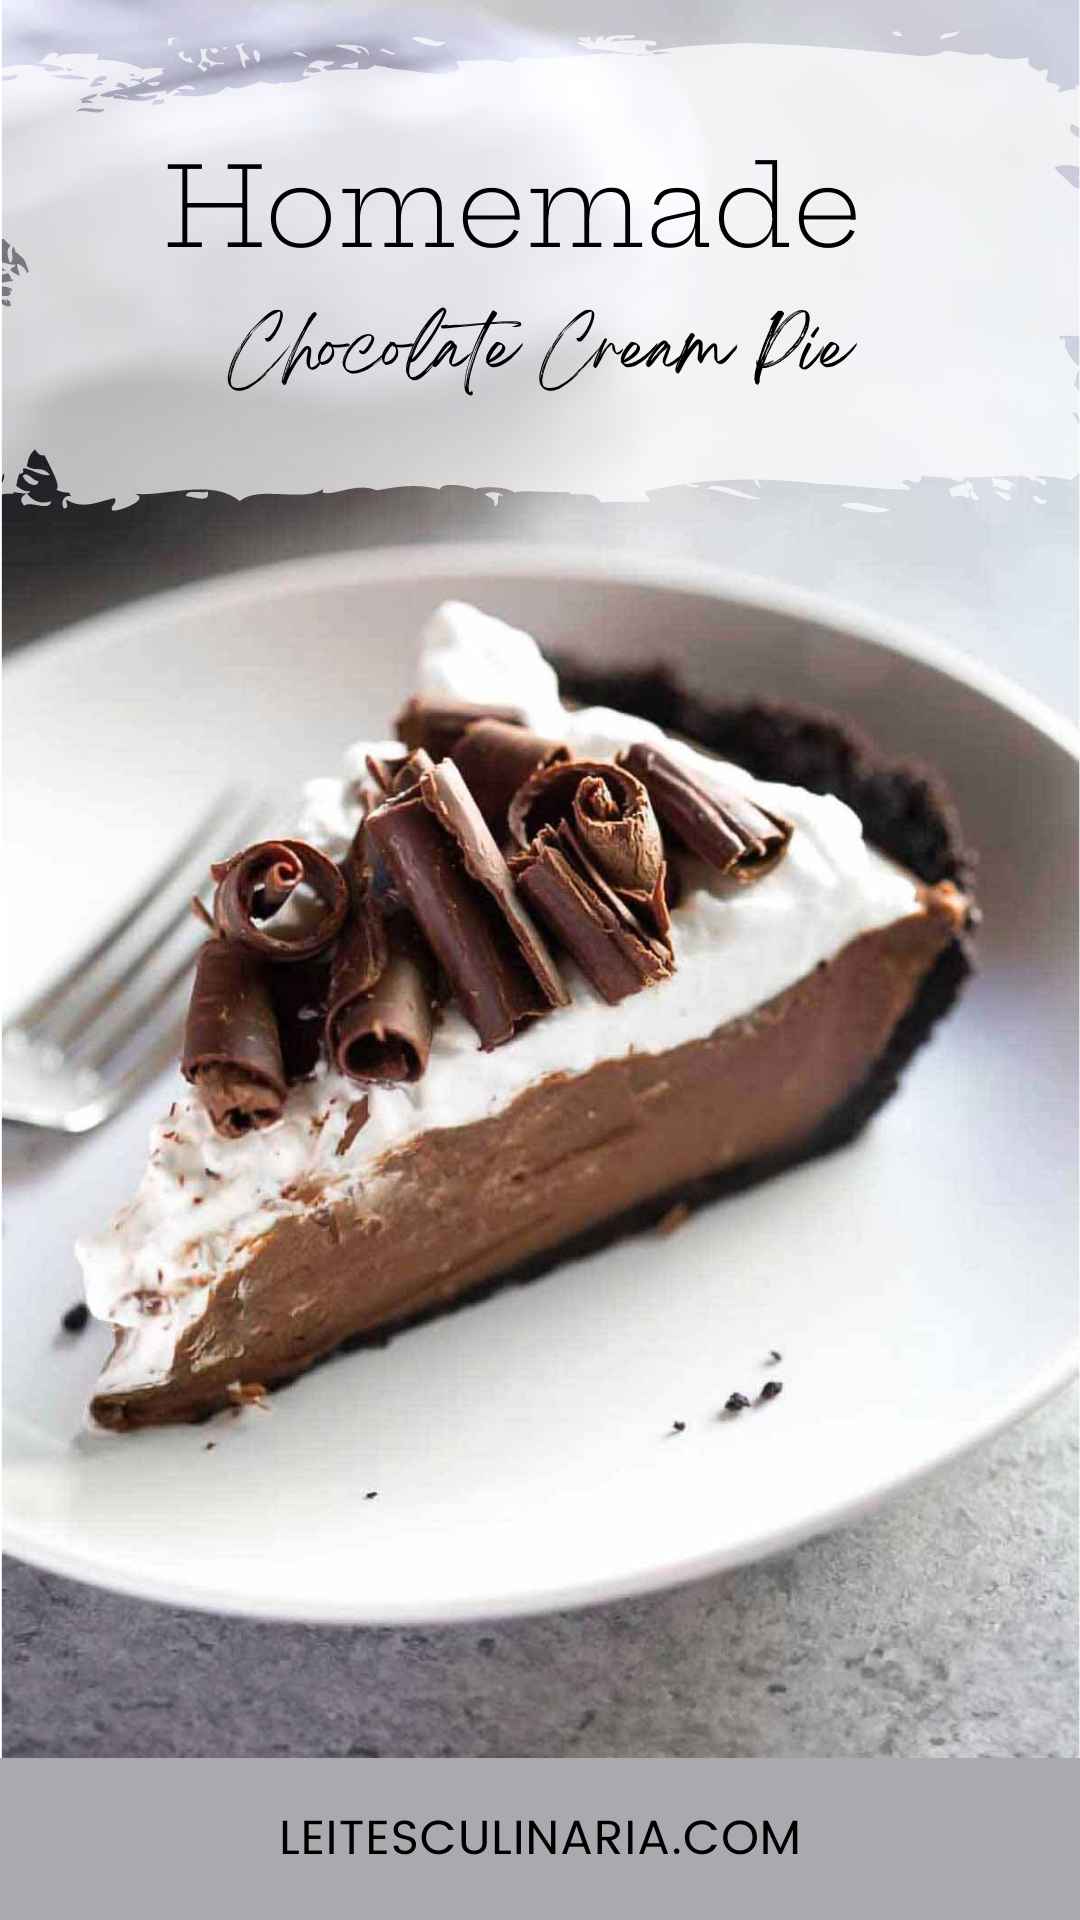 A slice of chocolate cream pie with Oreo crust topped with chocolate curls on a white plate.